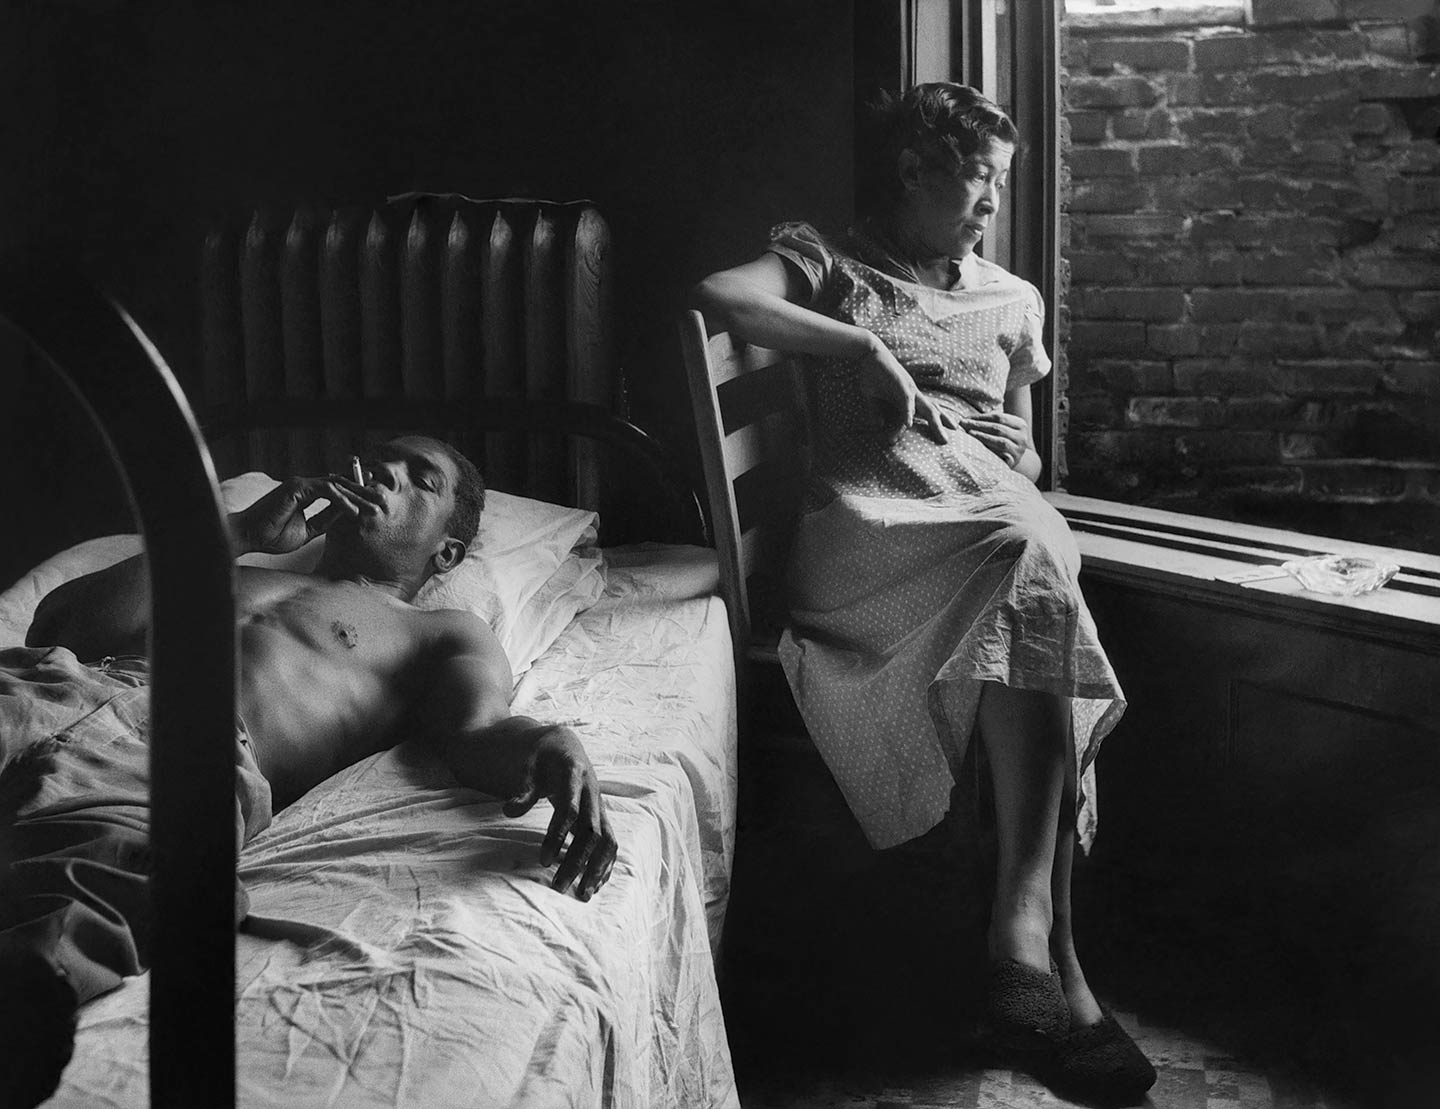 Tenement Dwellers, Chicago, Illinois, 1950, man and woman in tenement